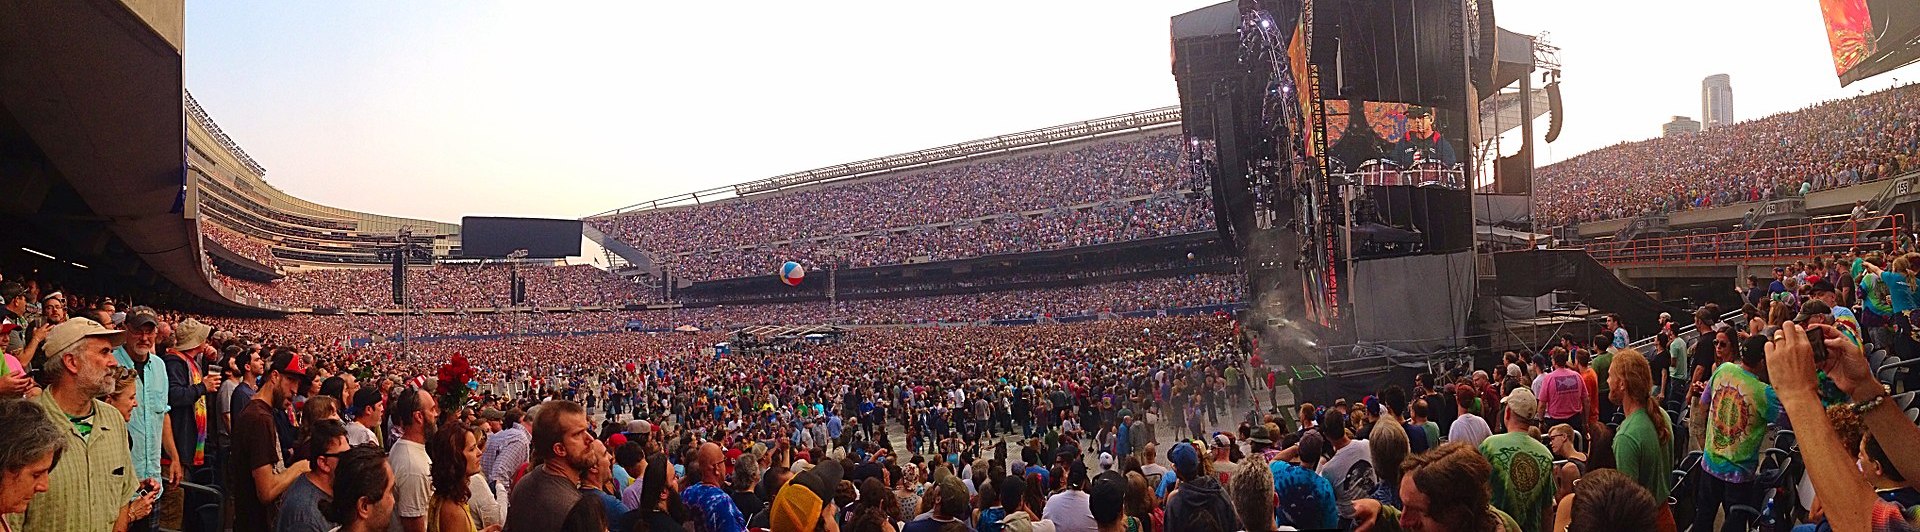 Fare Thee Well concert Soldier Field Chicago July 2015